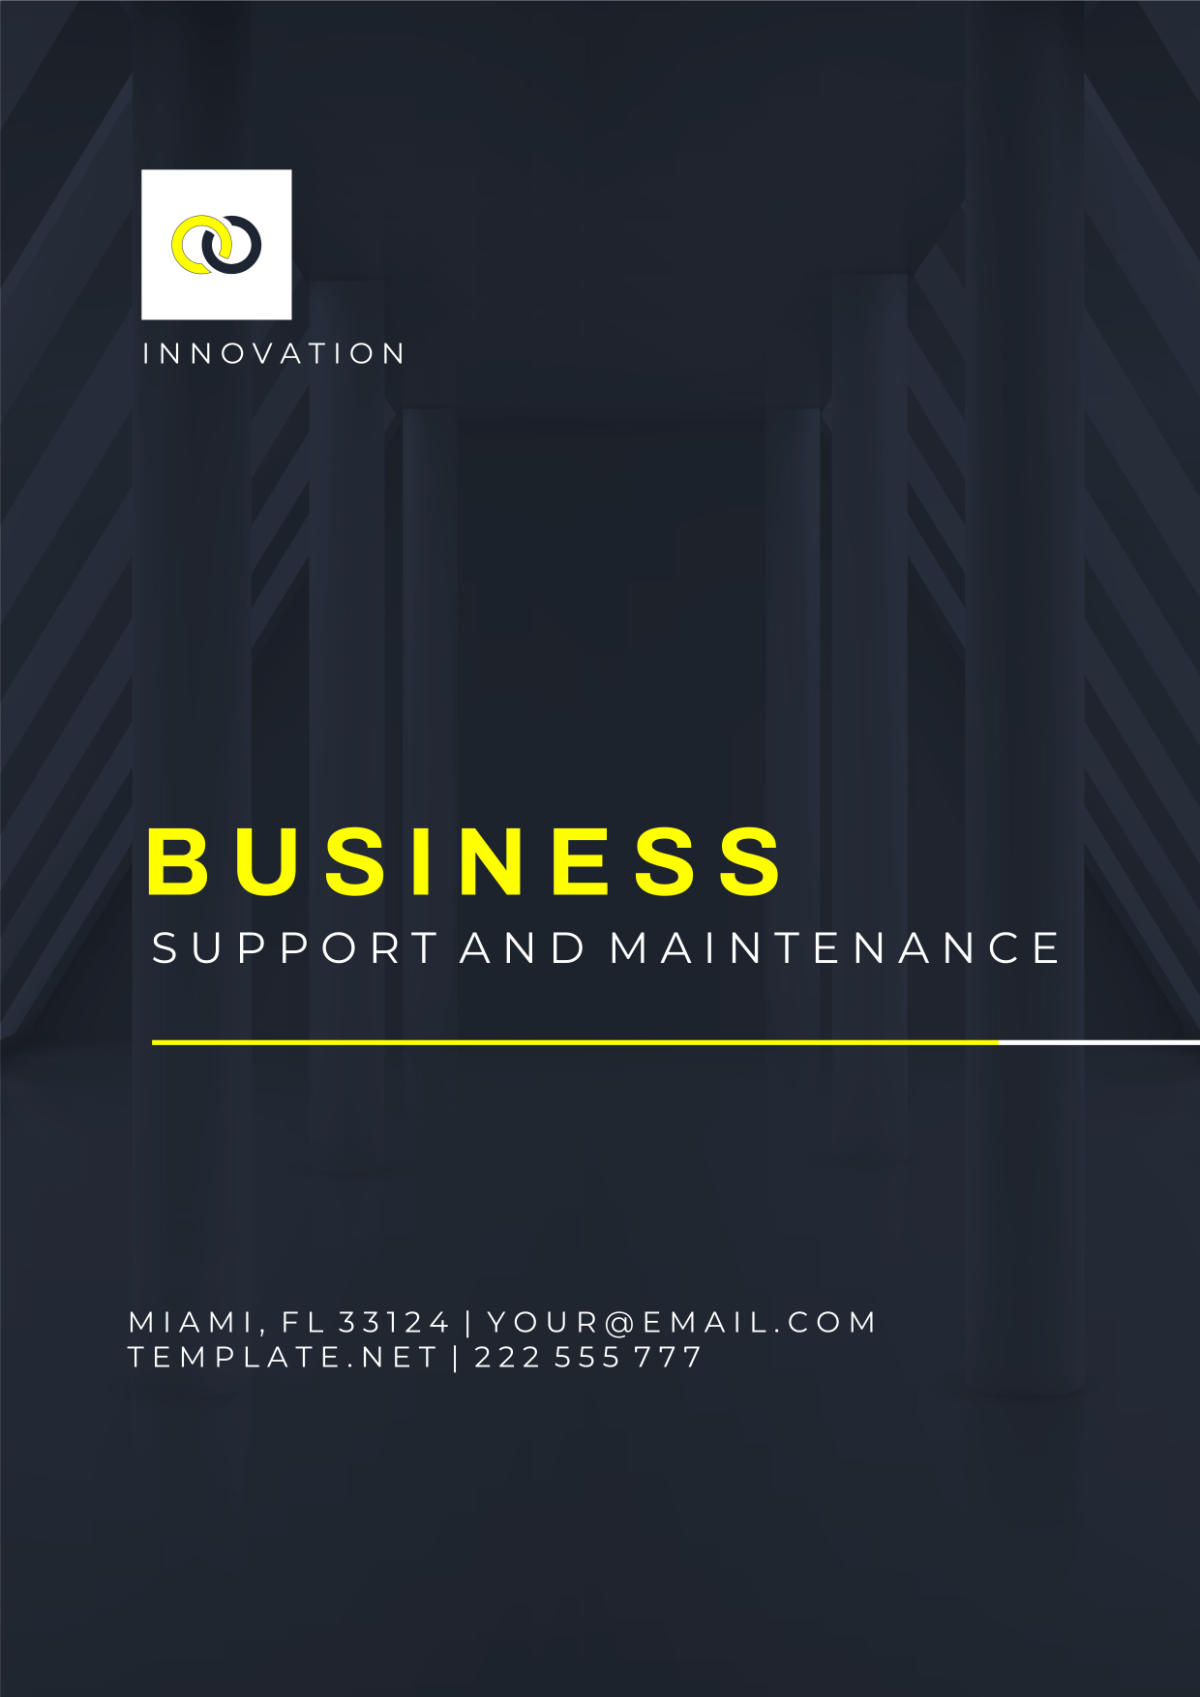 Corporate Support and Maintenance Cover Page